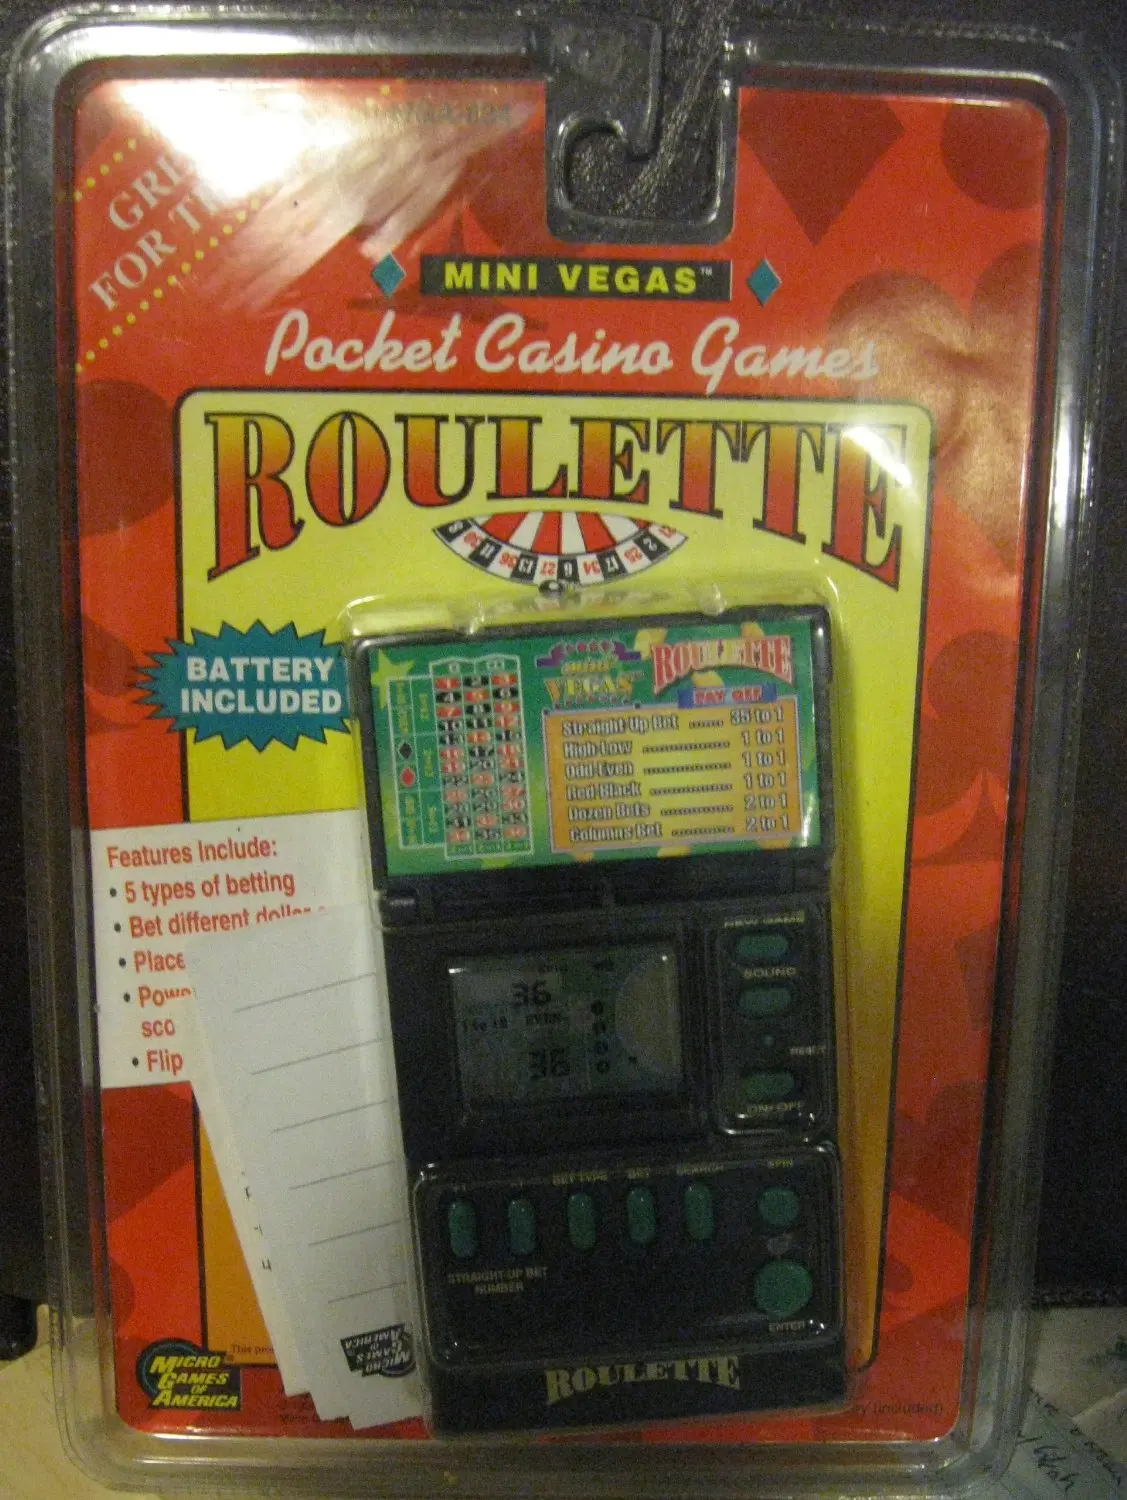 mobile handheld electronic devices roulette